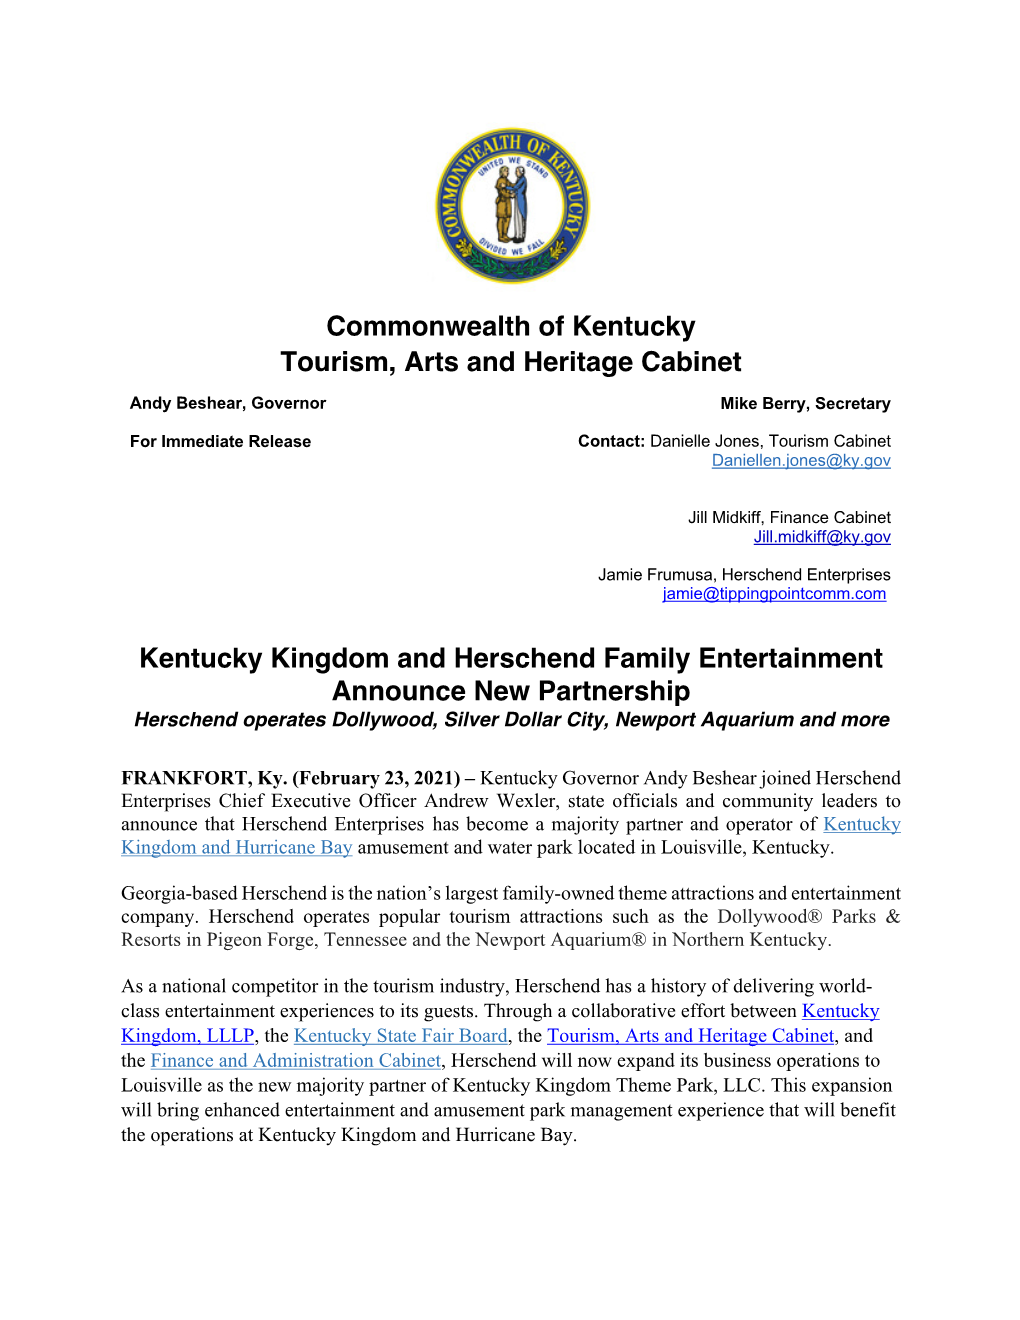 Commonwealth of Kentucky Tourism, Arts and Heritage Cabinet Kentucky Kingdom and Herschend Family Entertainment Announce New